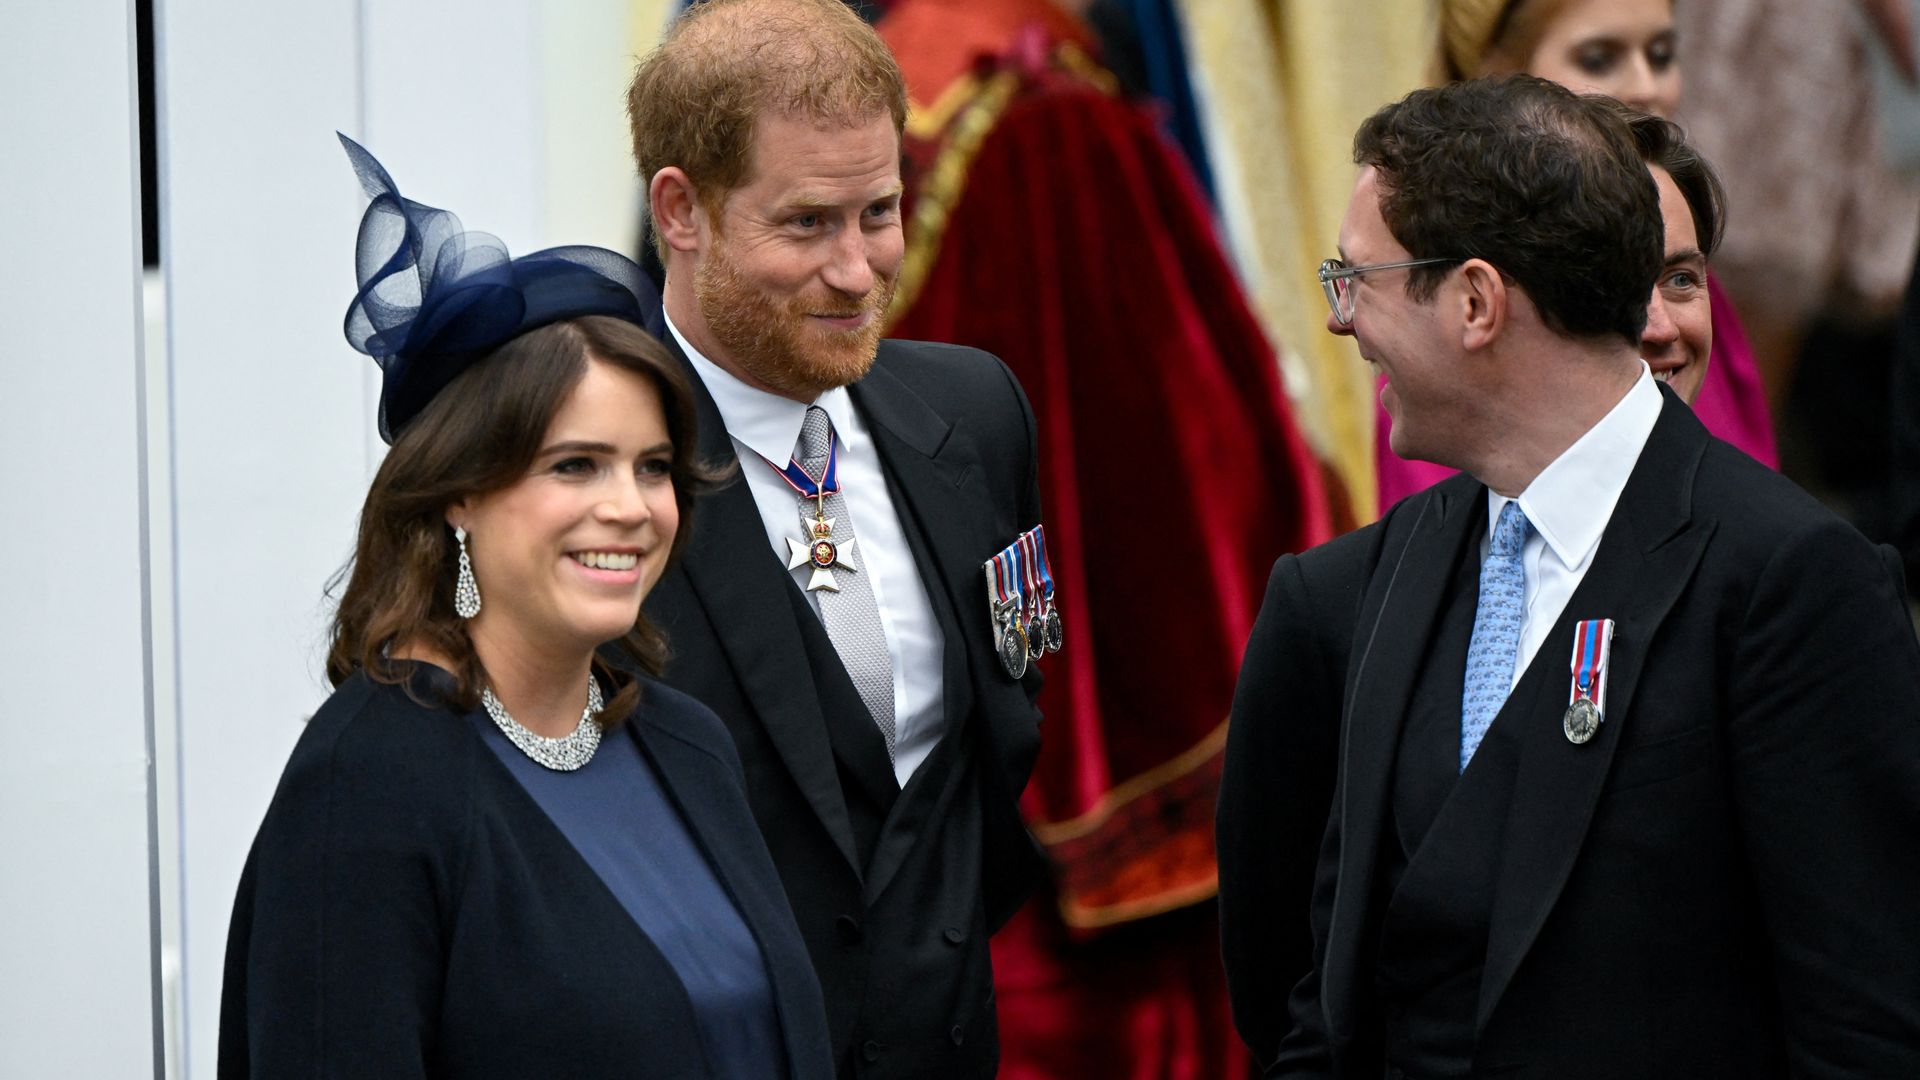 Prince Harry chatting with Princess Eugenie and Jack Brooksbank at coronation